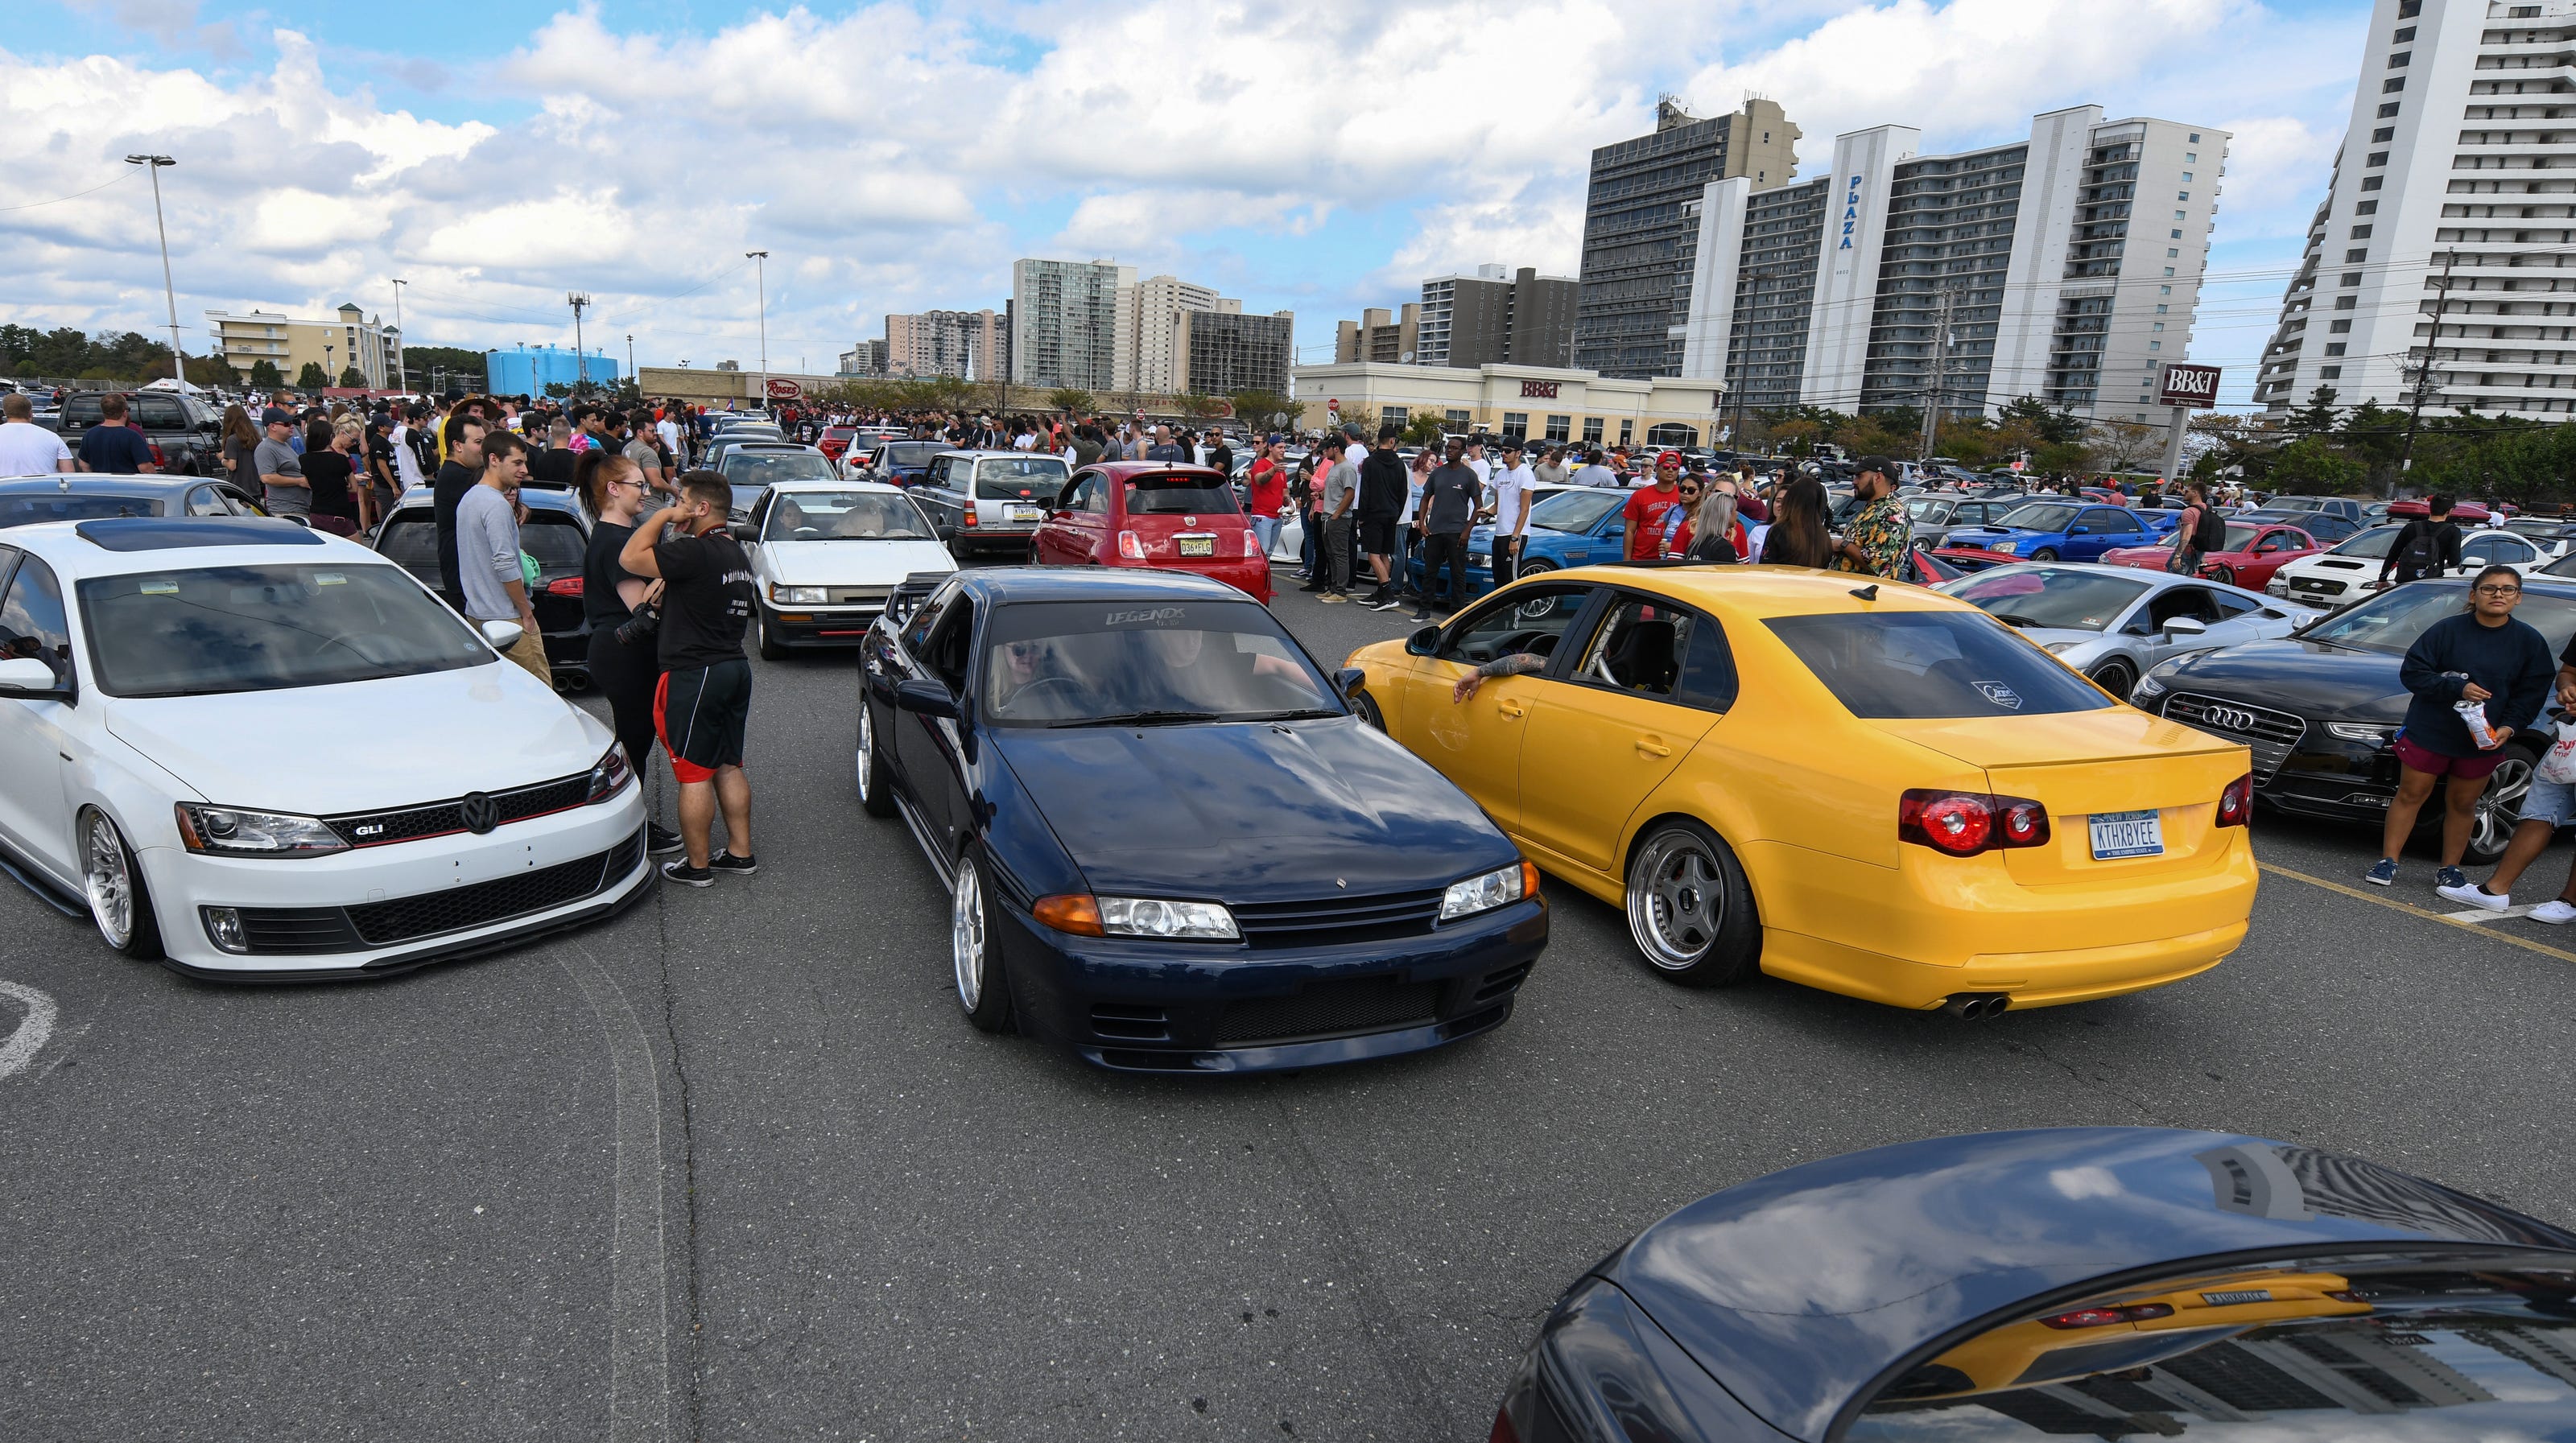 Ocean City braces for return of H2Oi after chaotic 2019 event